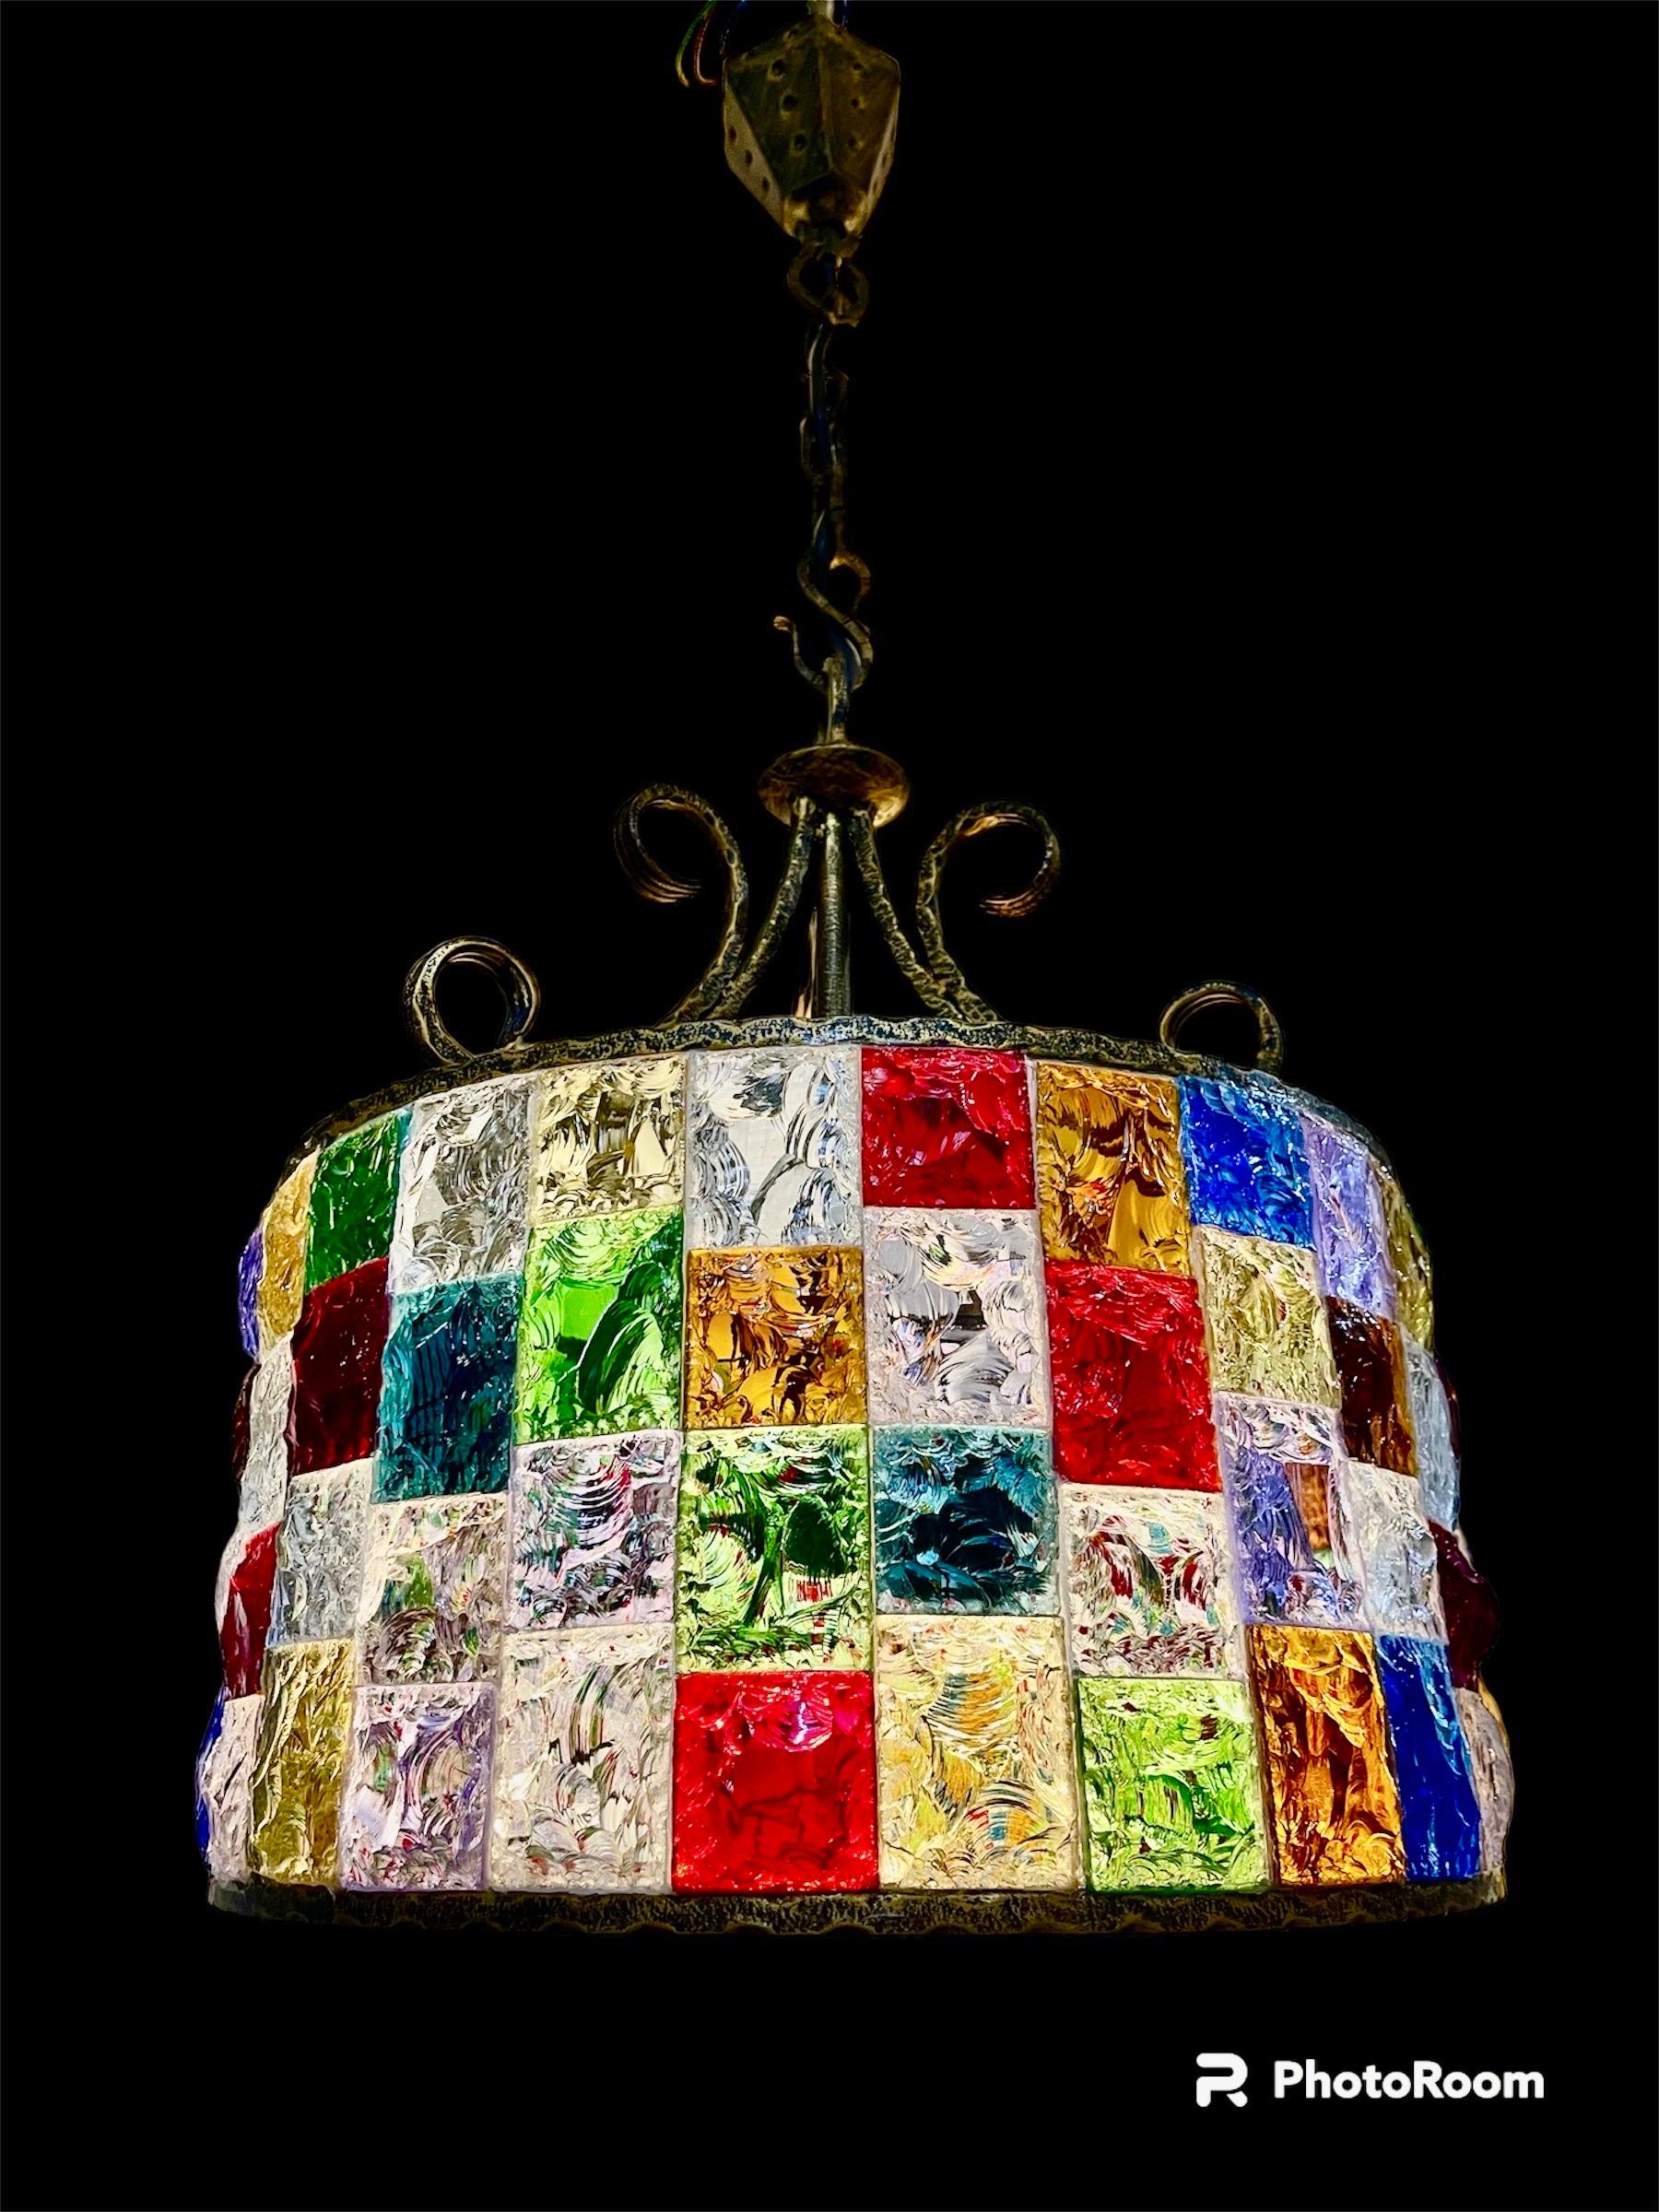 Superbe Chandelier multicolore glass Murano with brutalisat iron structure . The Design and the quality of the glass make this piece the best of the italian Design .
This unique Chandelier in multicolore glass murano are exceptional .

This Pieces